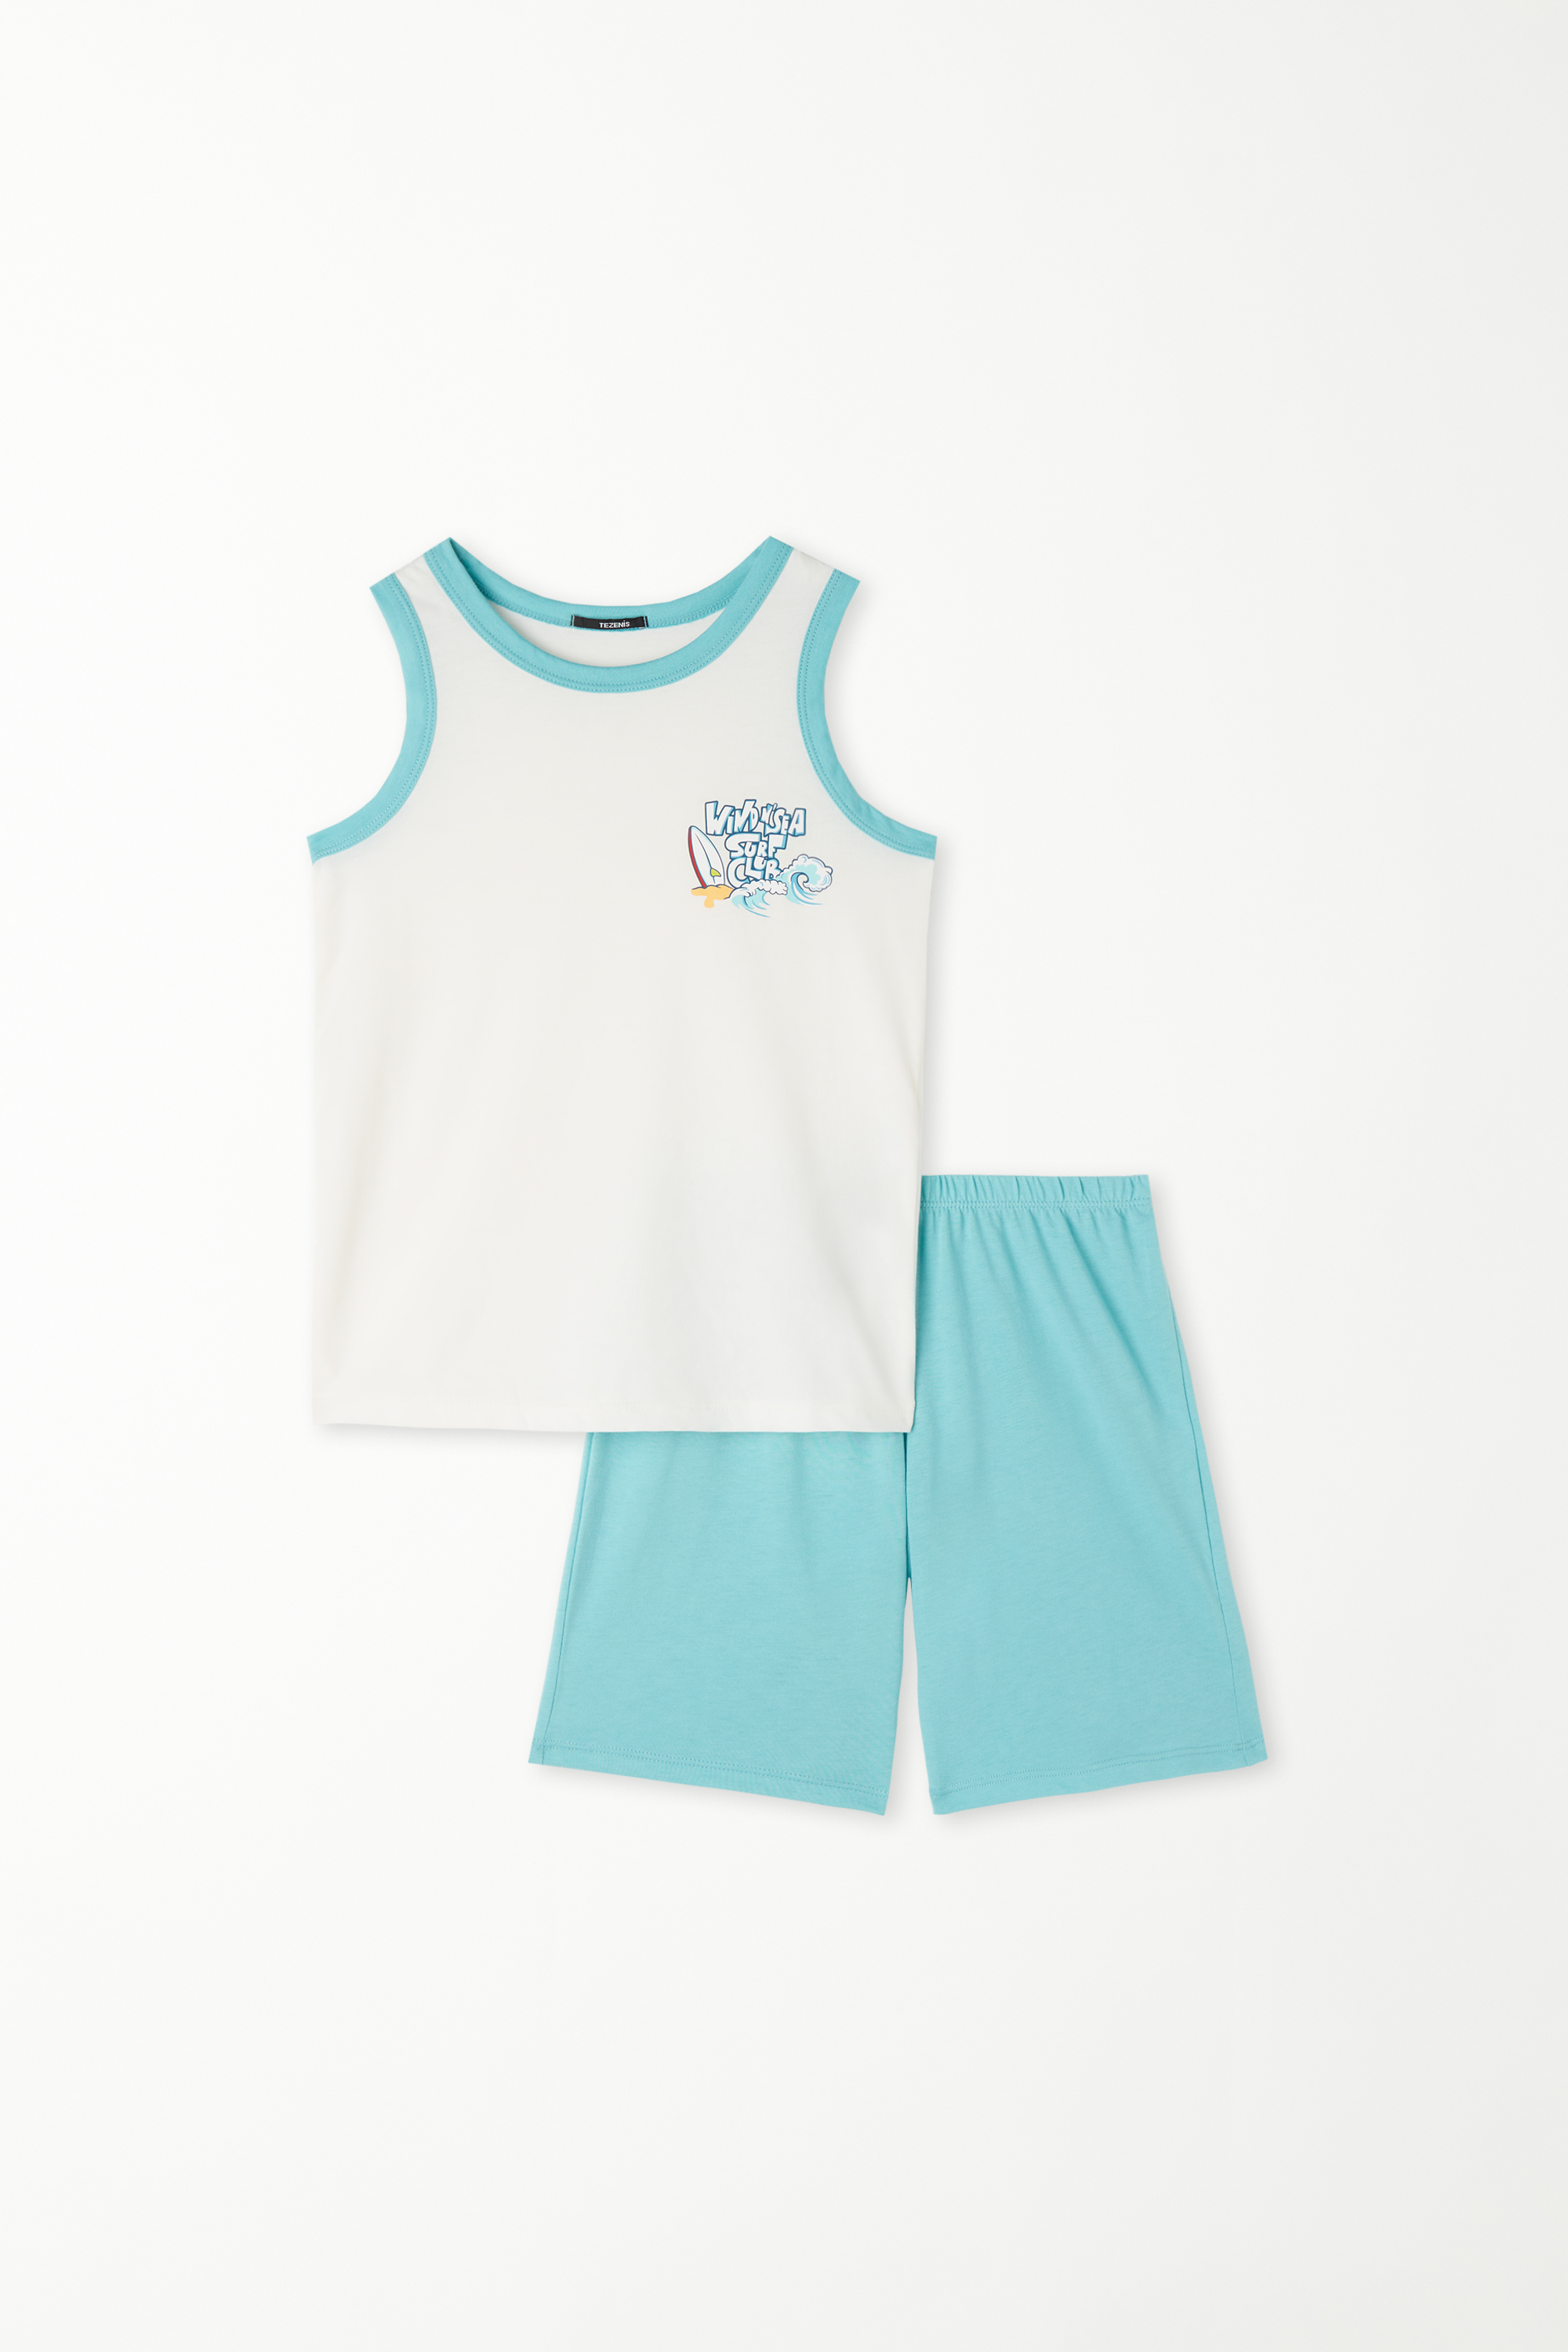 Boys’ Printed Cotton Vest and Shorts Set